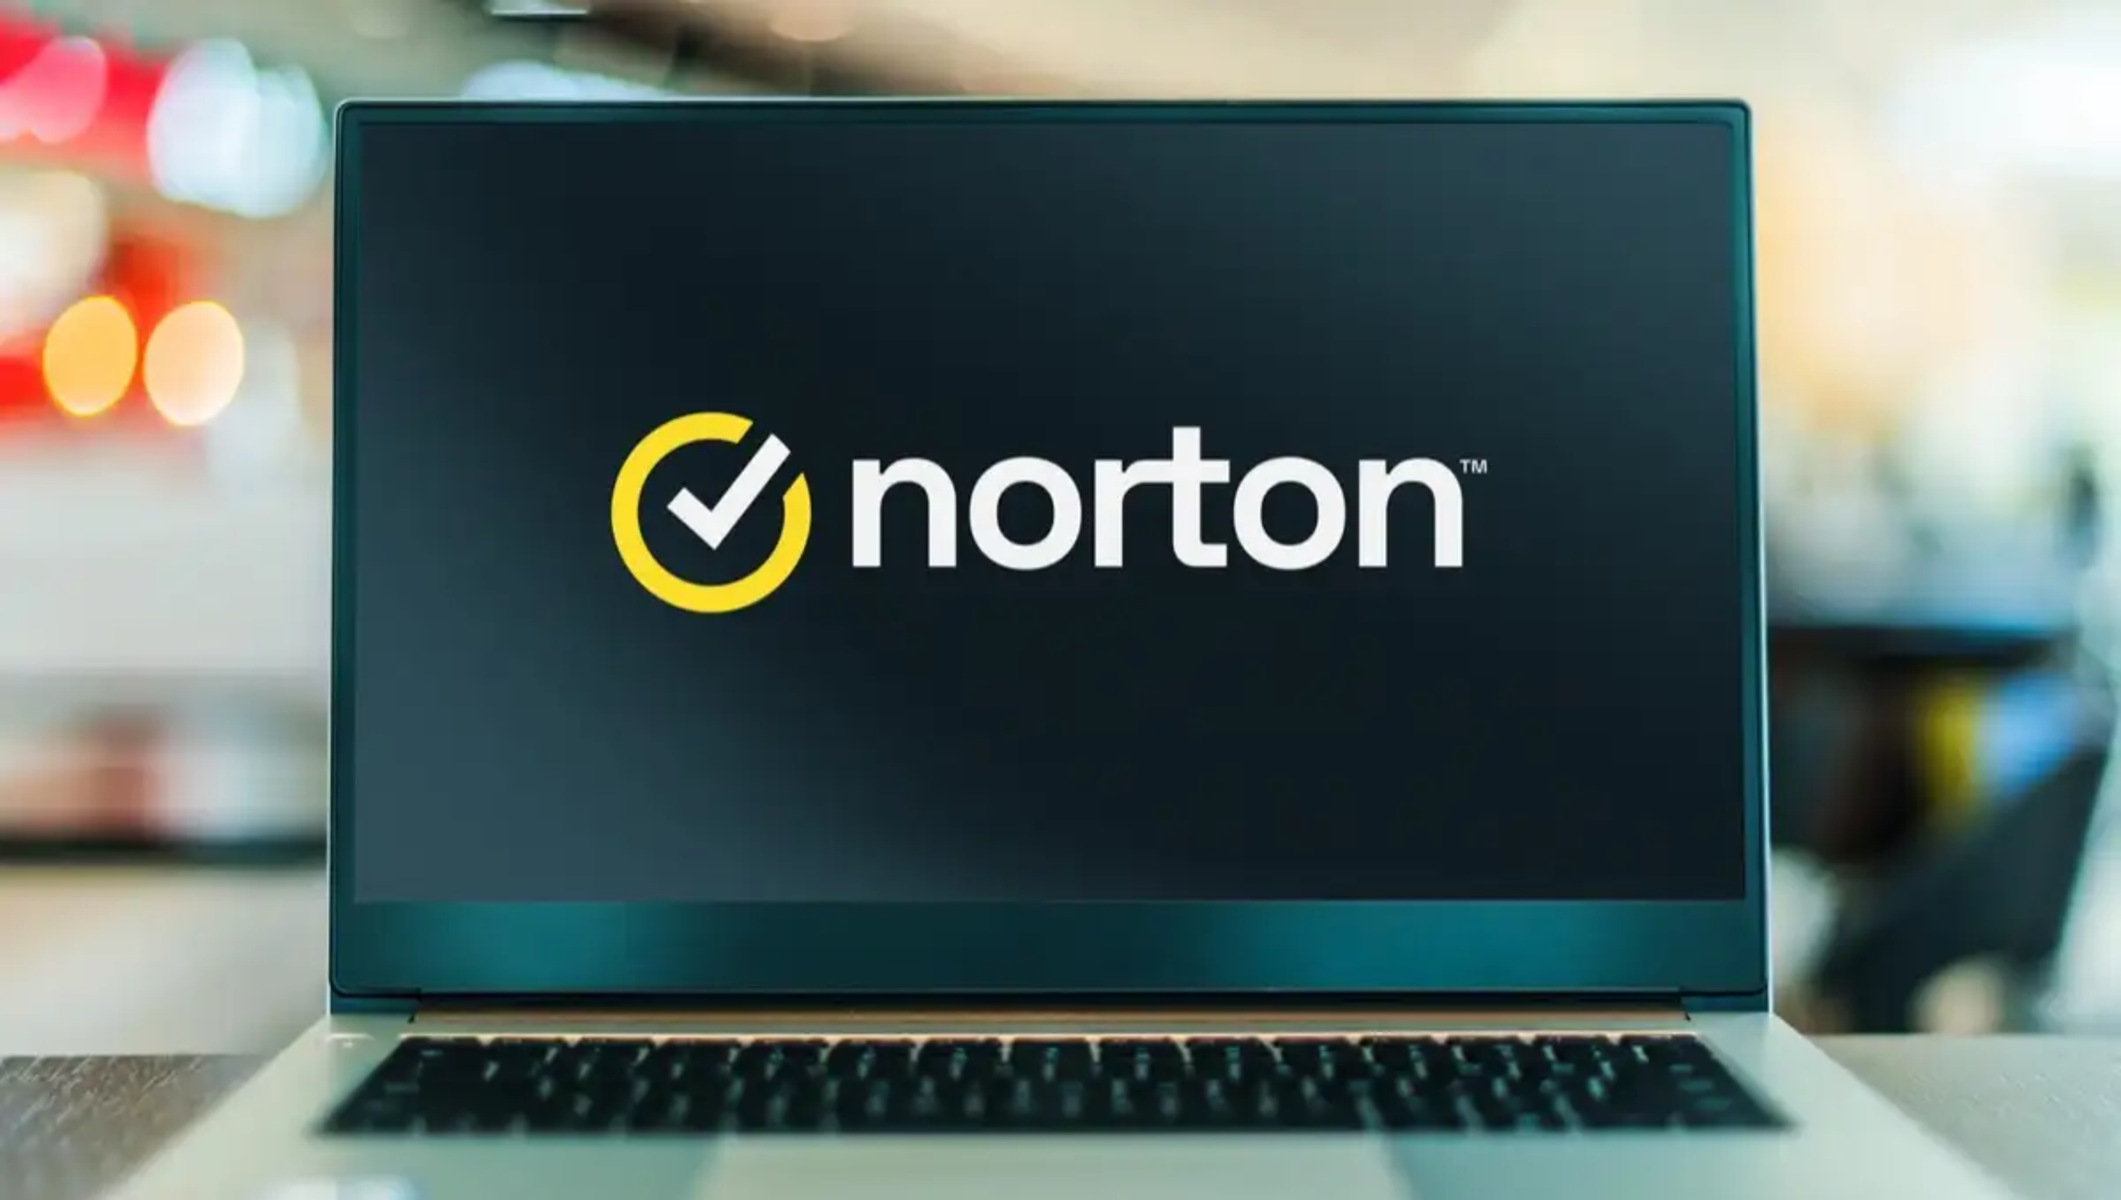 How To Remove Norton Toolbar From Chrome